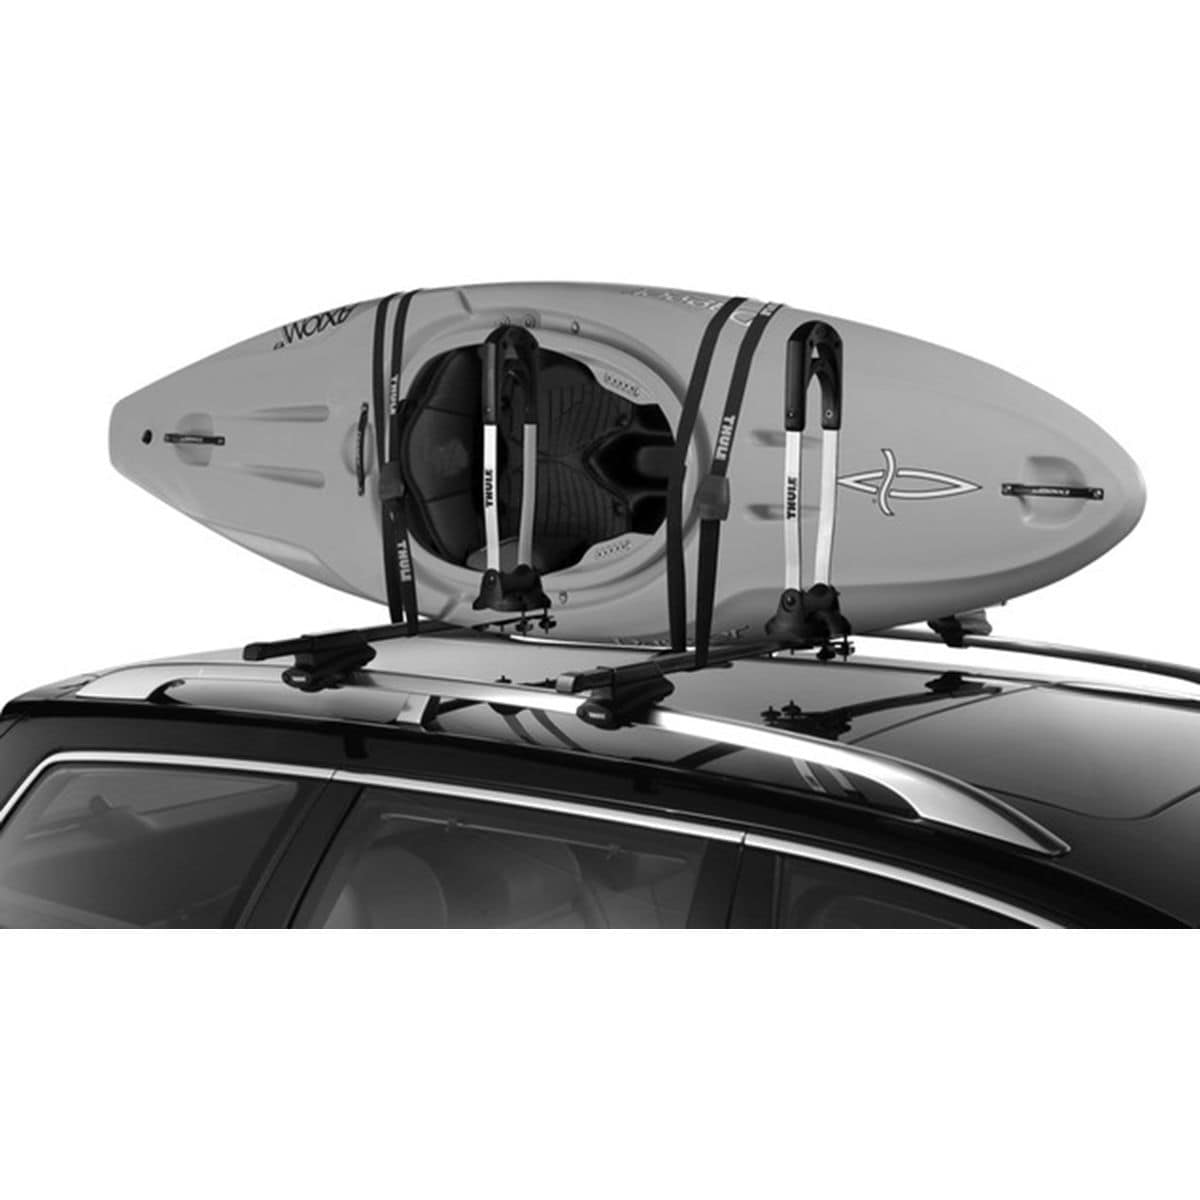 Photos - Inflatable Boat Thule Stacker Kayak Carrier 